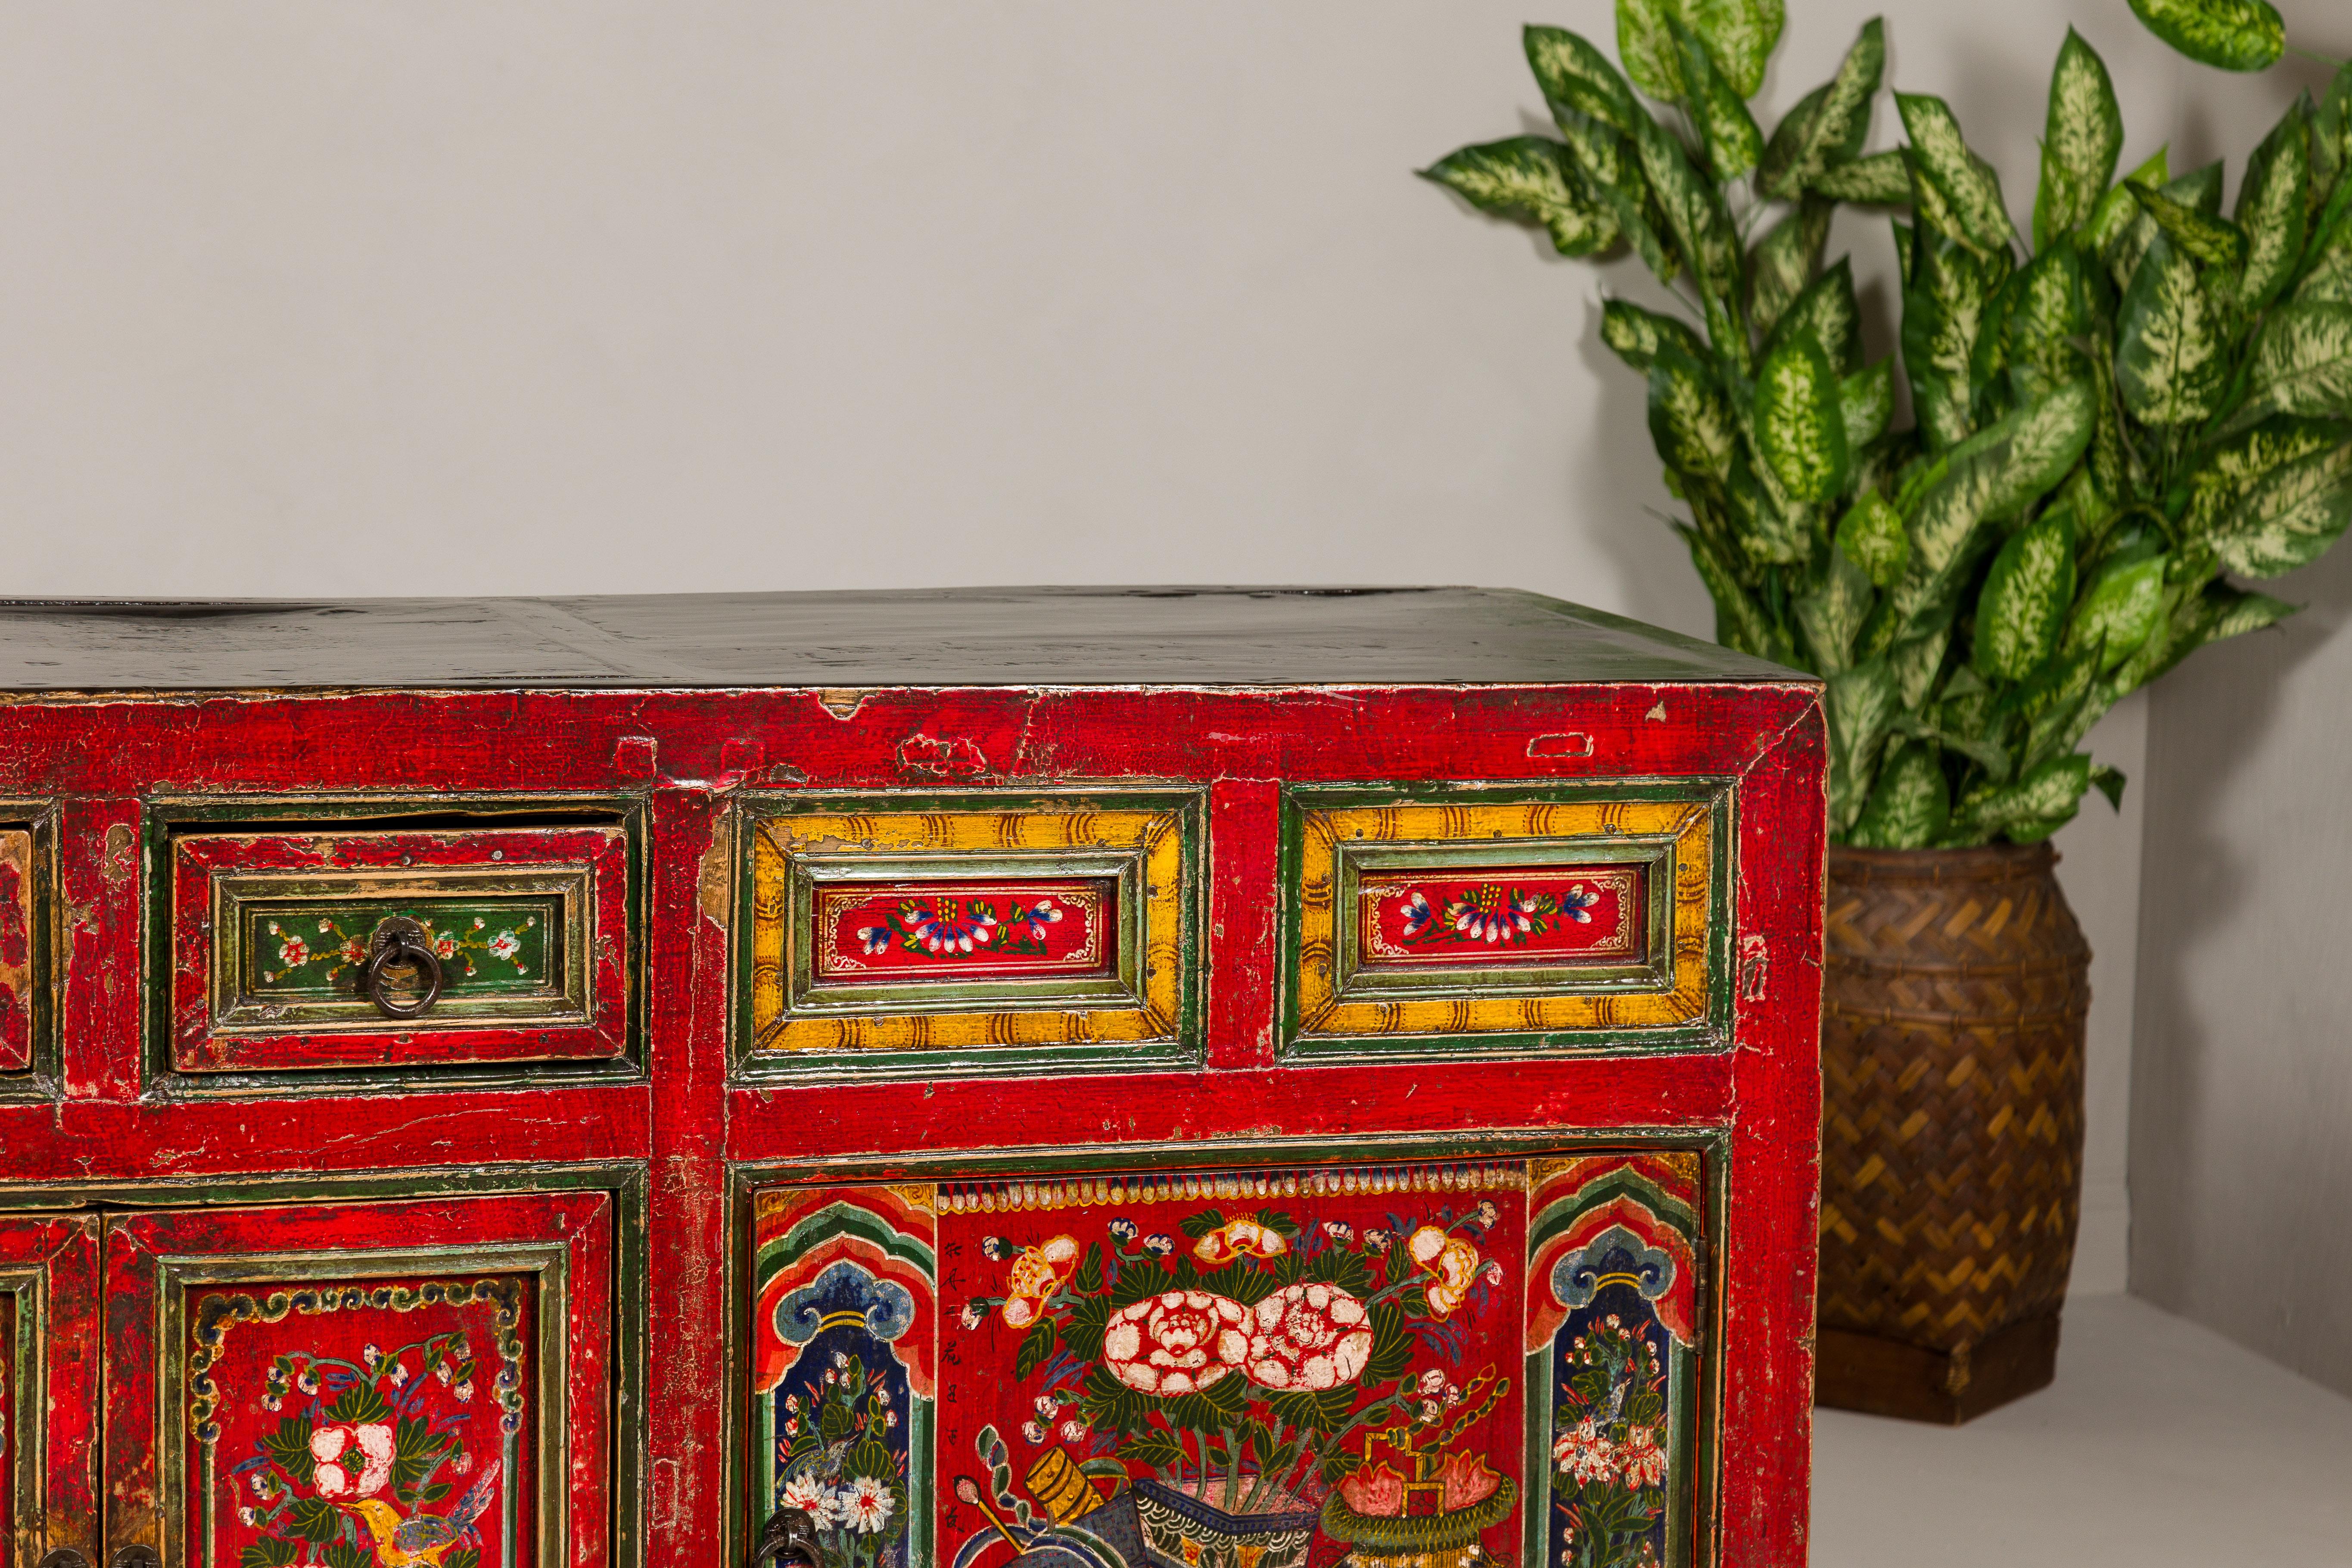 19th Century Mongolian Polychrome Sideboard with Doors, Drawers and Floral Décor For Sale 5